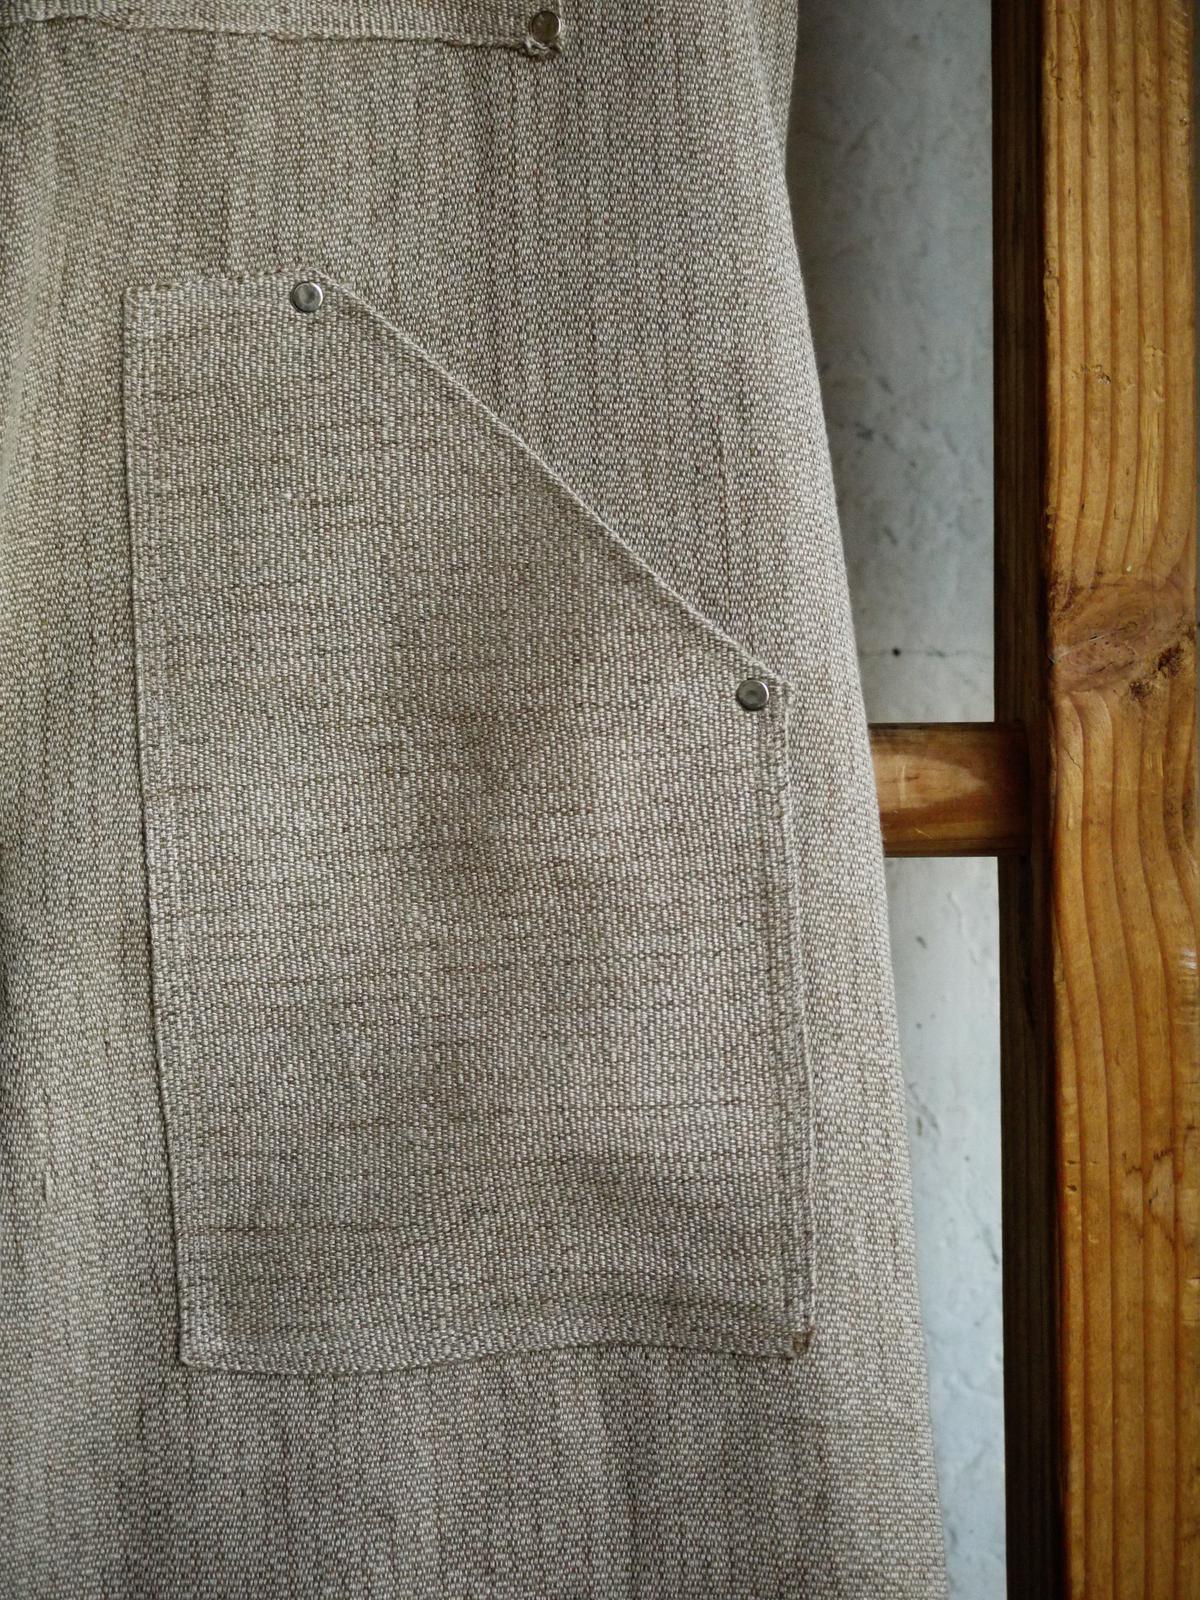 one of the patch pockets, affixed to the leg with small metal rivets. the grain of the canvas runs horizontally, opposed to the vertical grain on the rest of the garment.